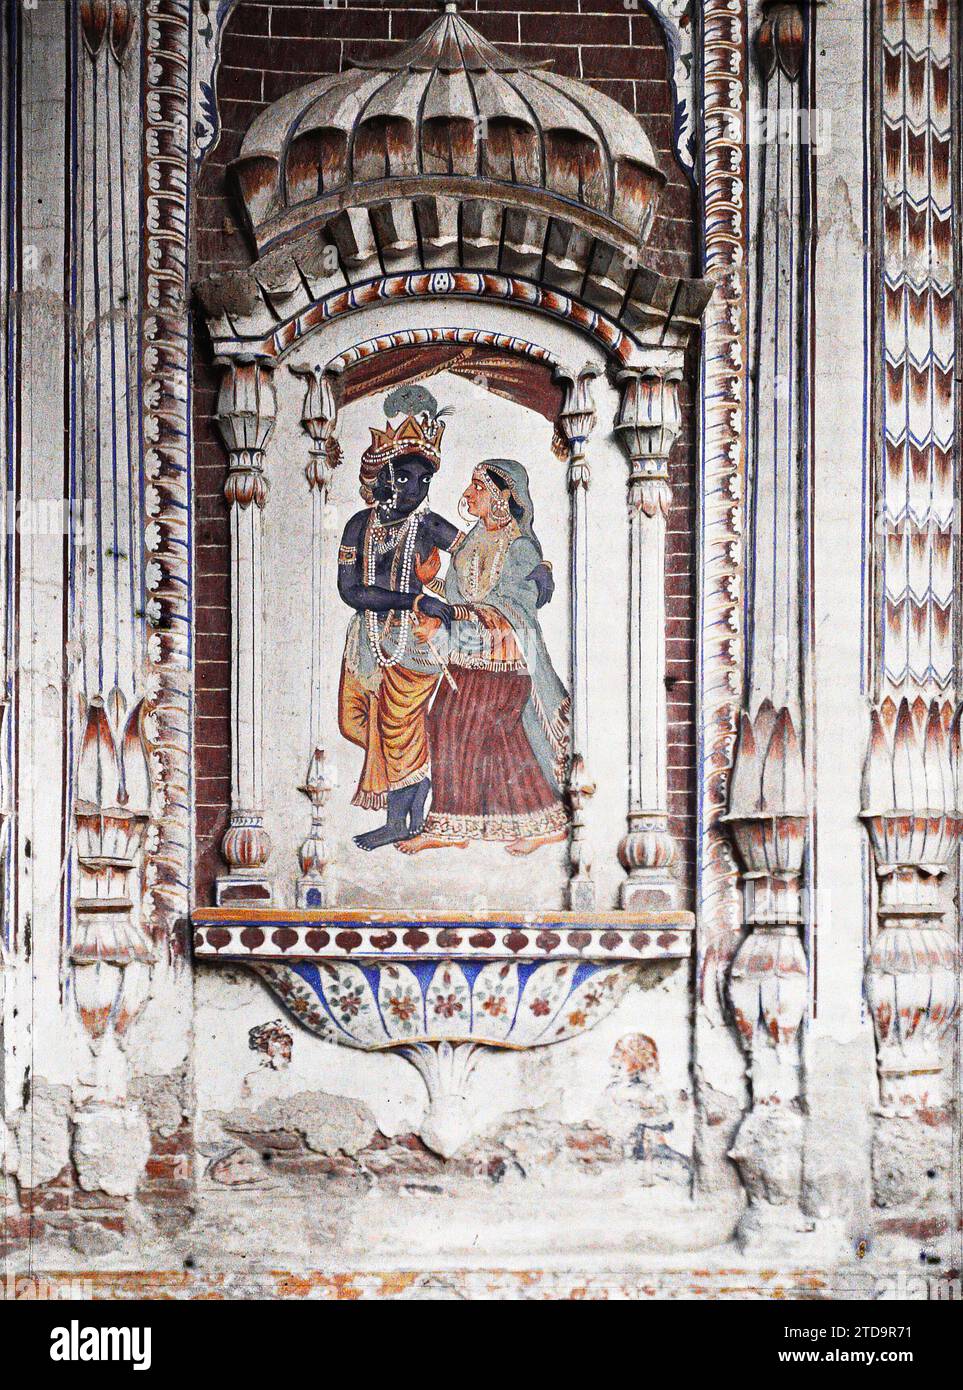 Lahore, India (present-day Pakistan) Painting of an exterior entrance to a Hindu temple representing Krishna and Râdhâ, Religion, HD, Art, Human beings, Temple, Hinduism, exists in high definition, Painted decor, Decorative arts, Supernatural being, India, Lahore, Sivaist Paintings, Lahore, 10/01/1914 - 15/01/1914, Passet, Stéphane, photographer, 1913-1914 - Inde, Pakistan - Stéphane Passet - (16 December-29 January), Autochrome, photo, Glass, Autochrome, photo, Vertical, Size 9 x 12 cm Stock Photo